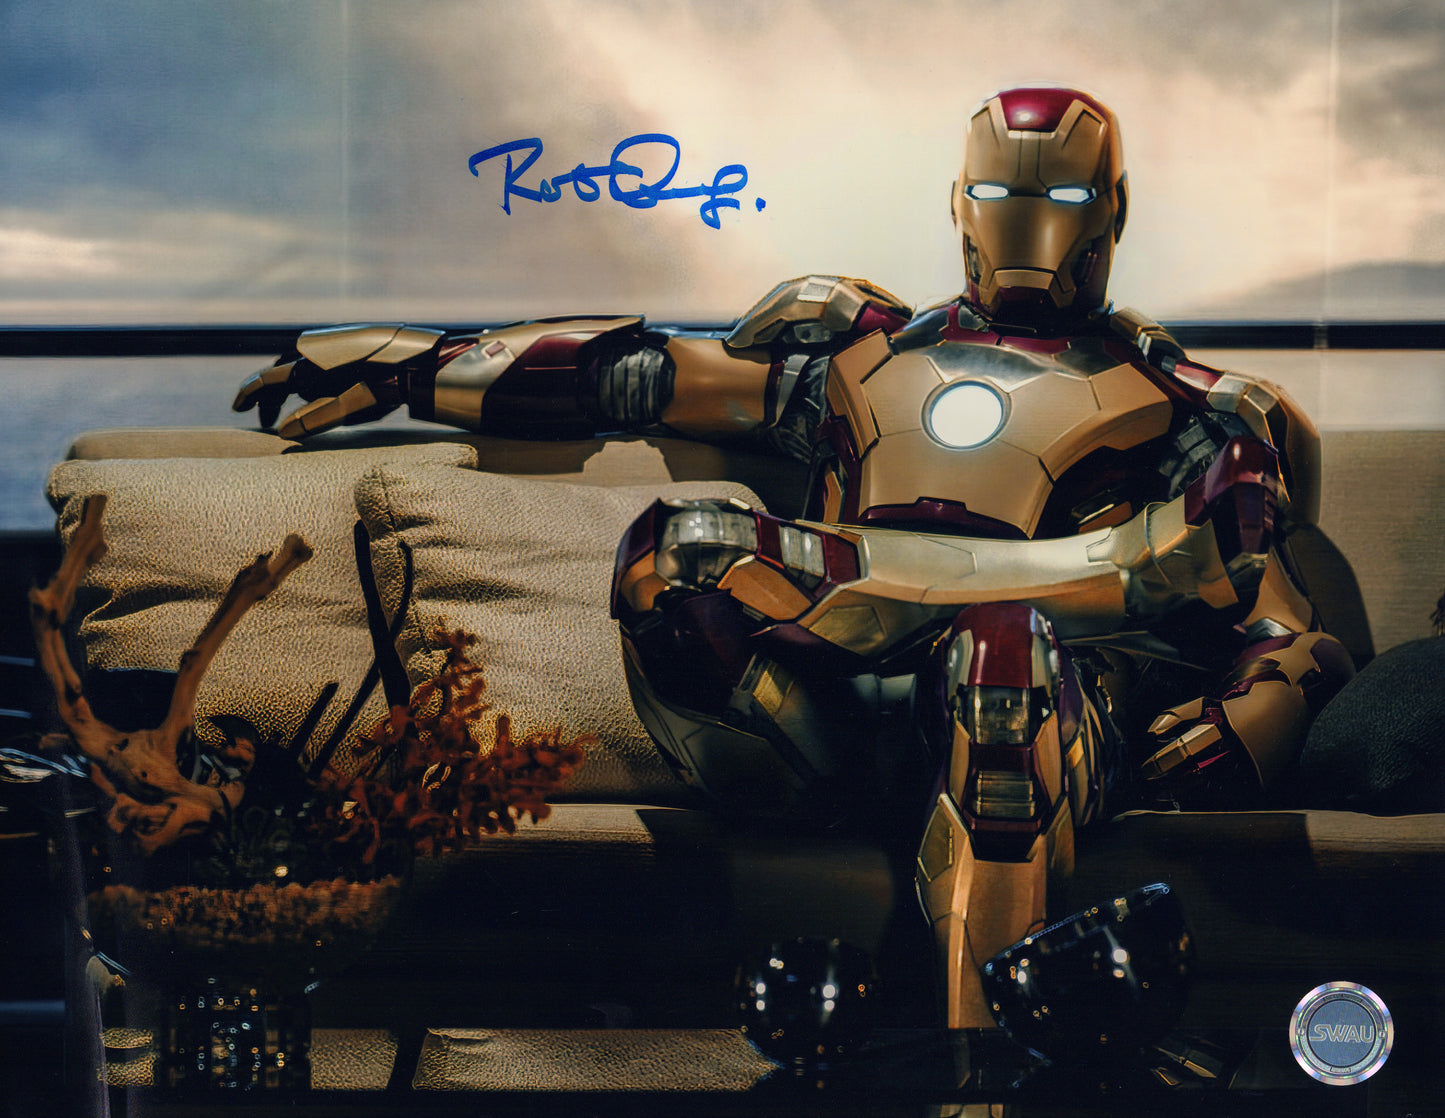 
                  
                    Robert Downey Jr. as Iron Man in Iron Man 3 (SWAU Witnessed) Signed 11x14 Photo
                  
                